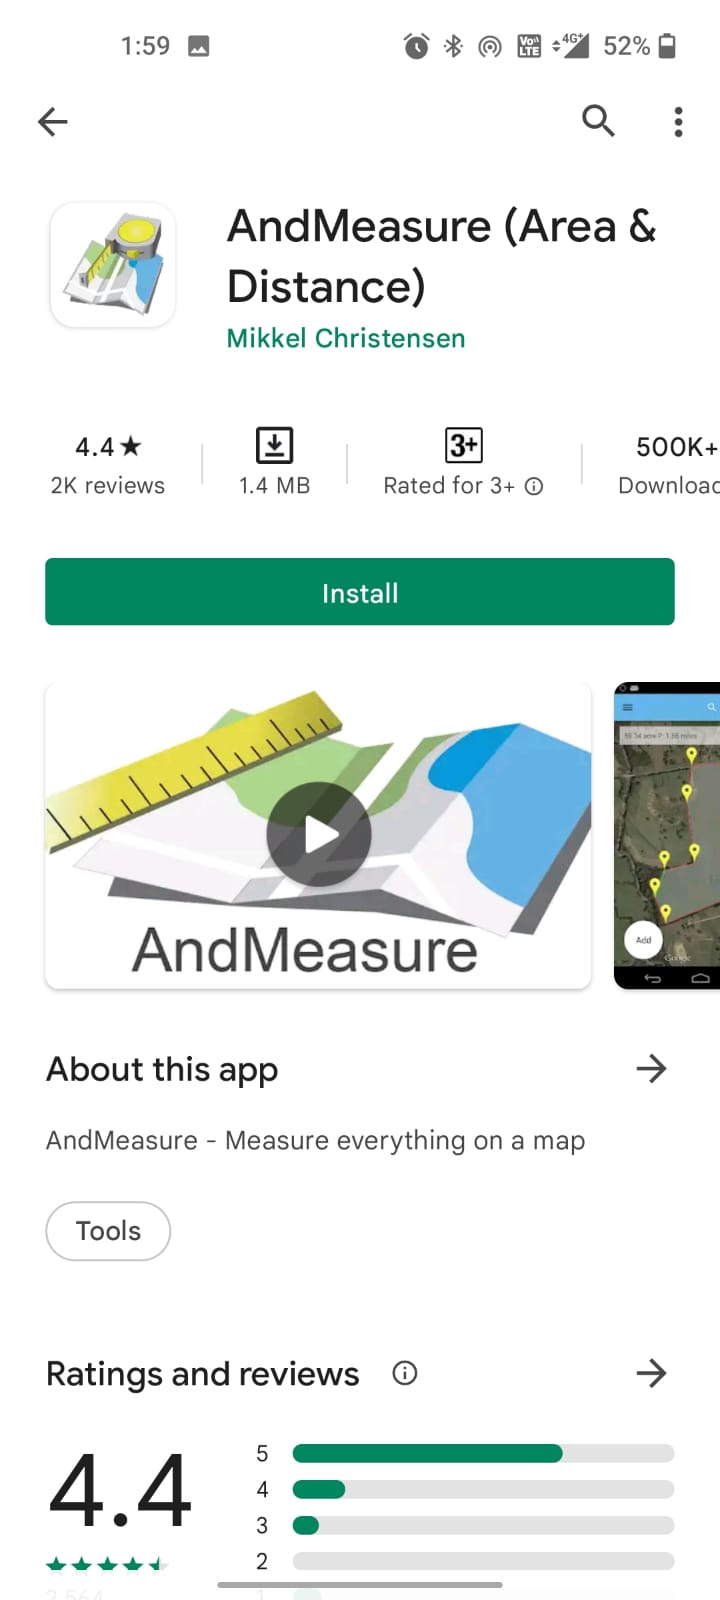 AndMeasure Area and Distance